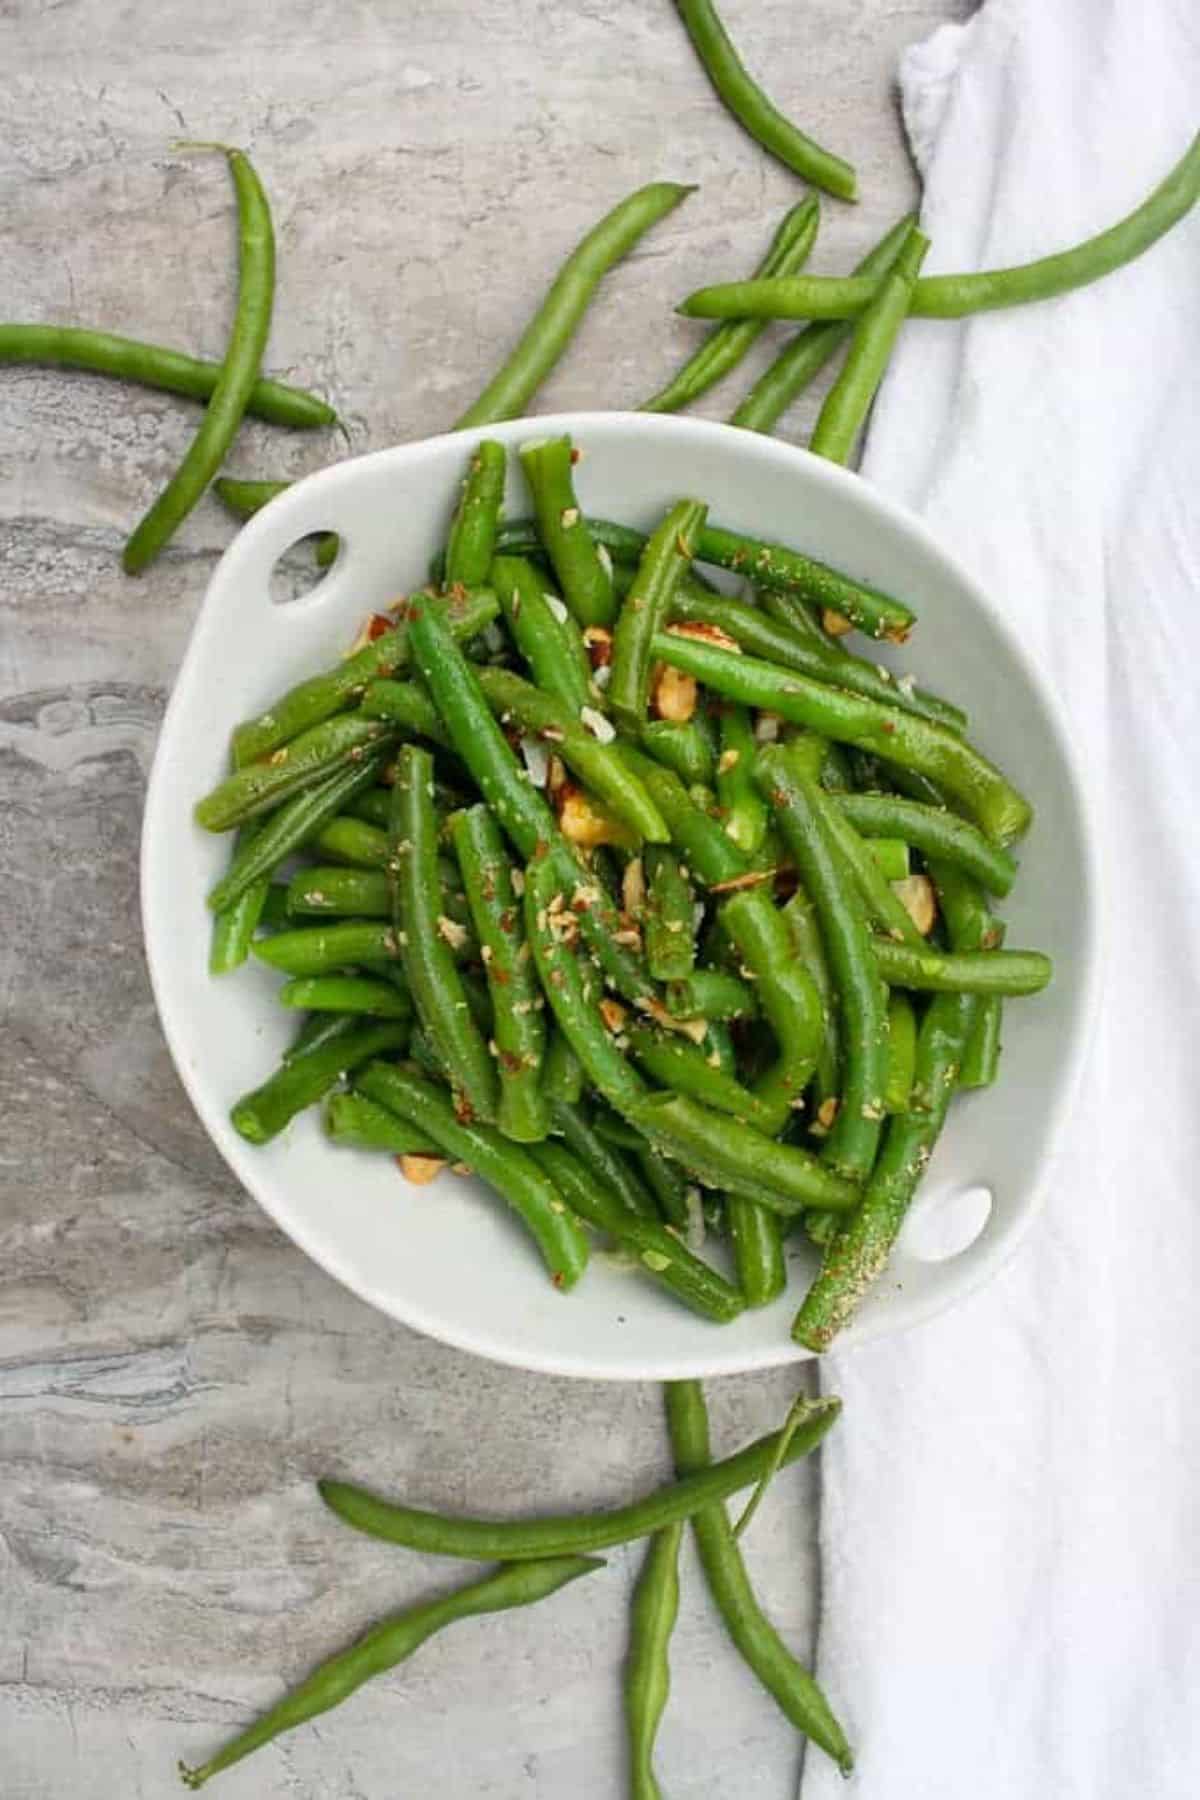 Healthy green bean salad with almonds in a white bowl.